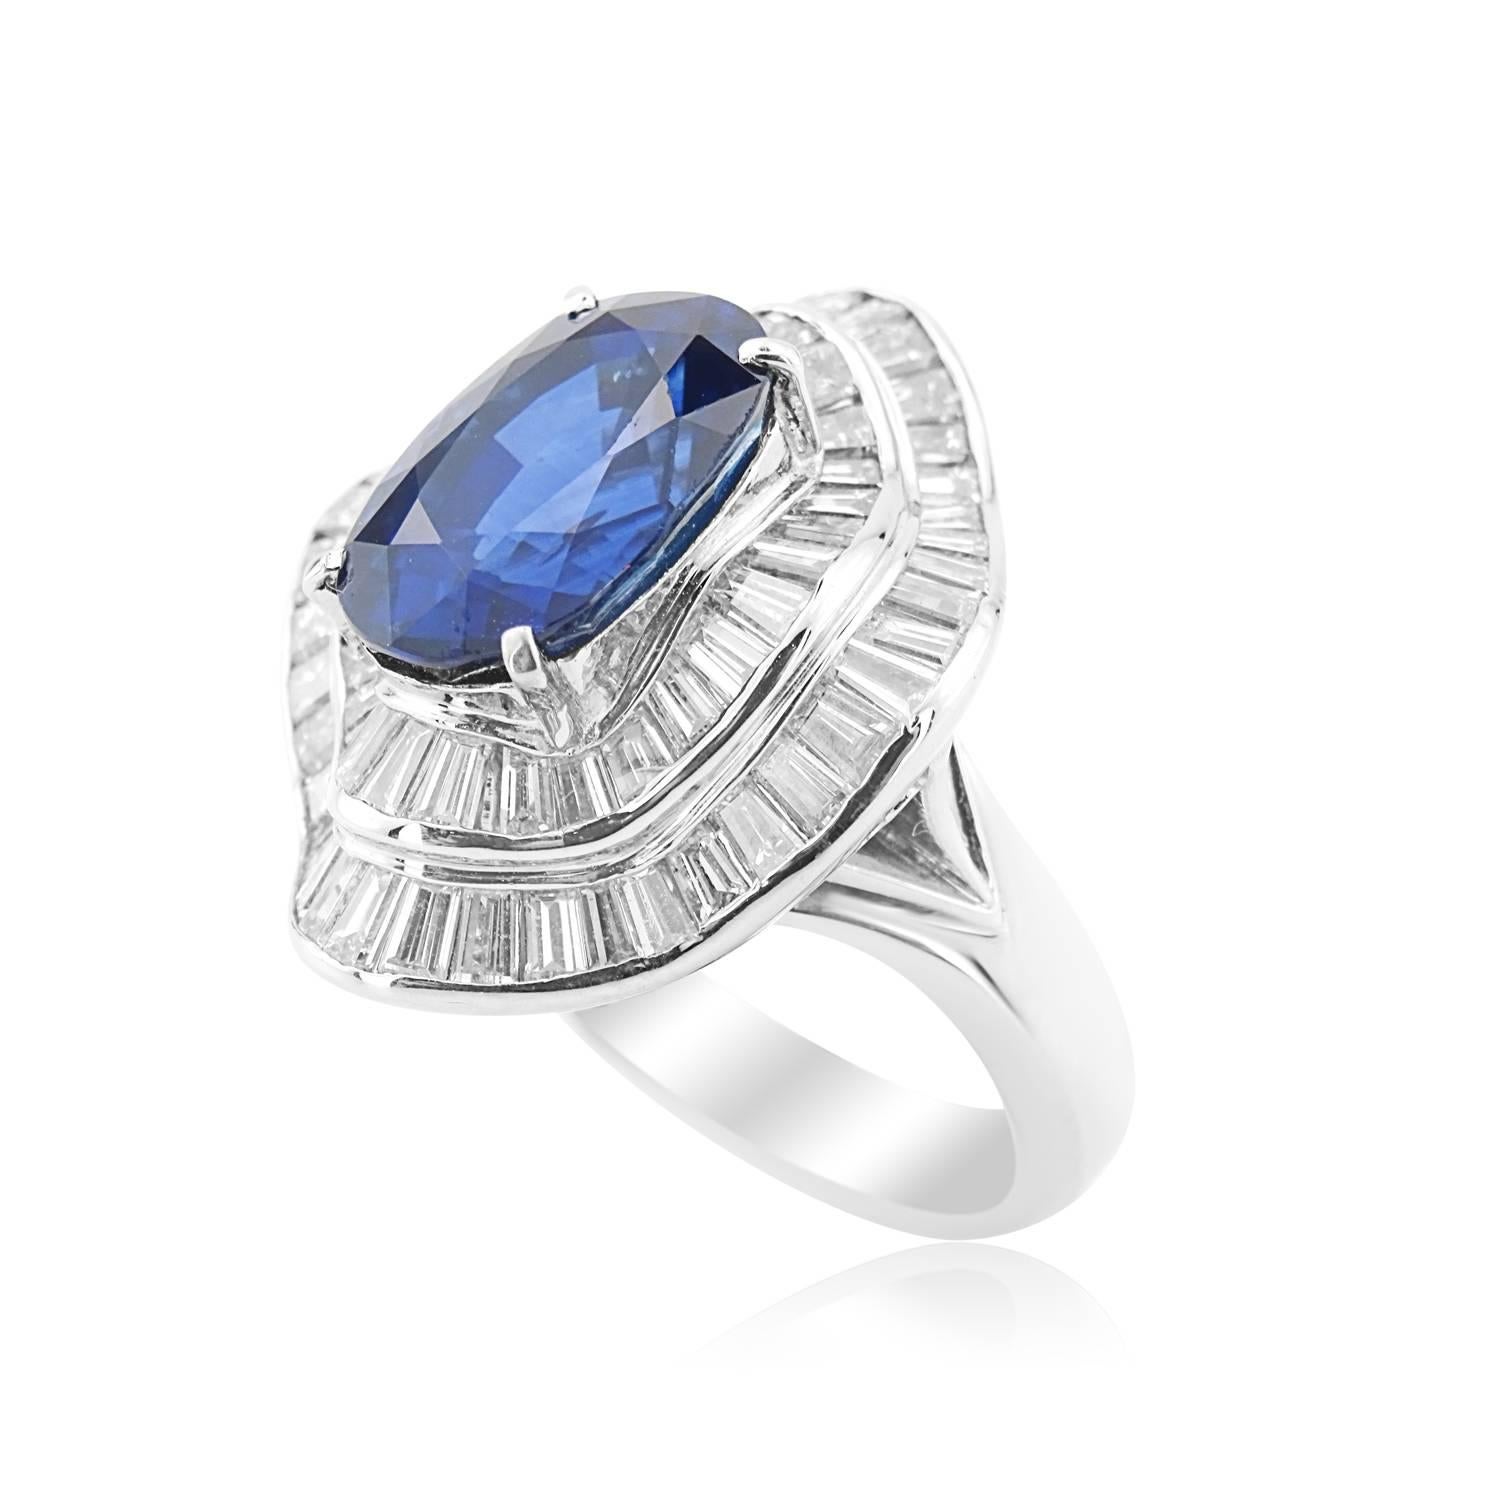 VIVID BLUE ROYAL SAPPHIRE RING


Set in 18 Kt white gold


Total sapphire weight: 7.21 ct
Color: Vivid blue
Origin: Sri Lanka

Total diamond weight: 3.20 ct
Color: G-H
Clarity: VS

Total ring weight: 16.40 grams


GRS Certified